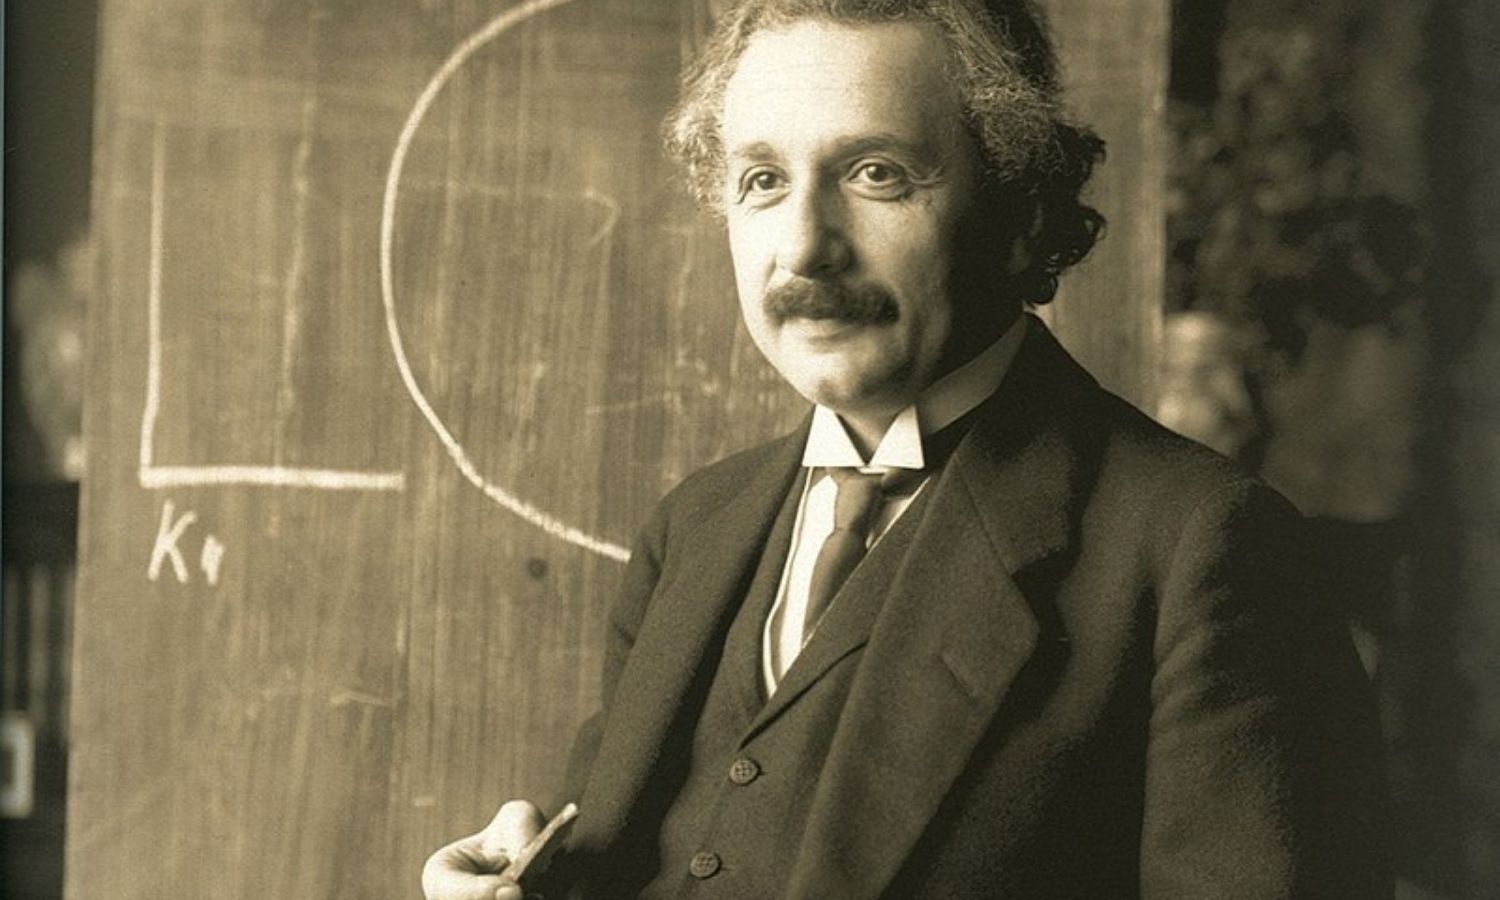 OTD in 1921: Albert Einstein visited New York City and lectured on his Theory of Relativity for the first time.